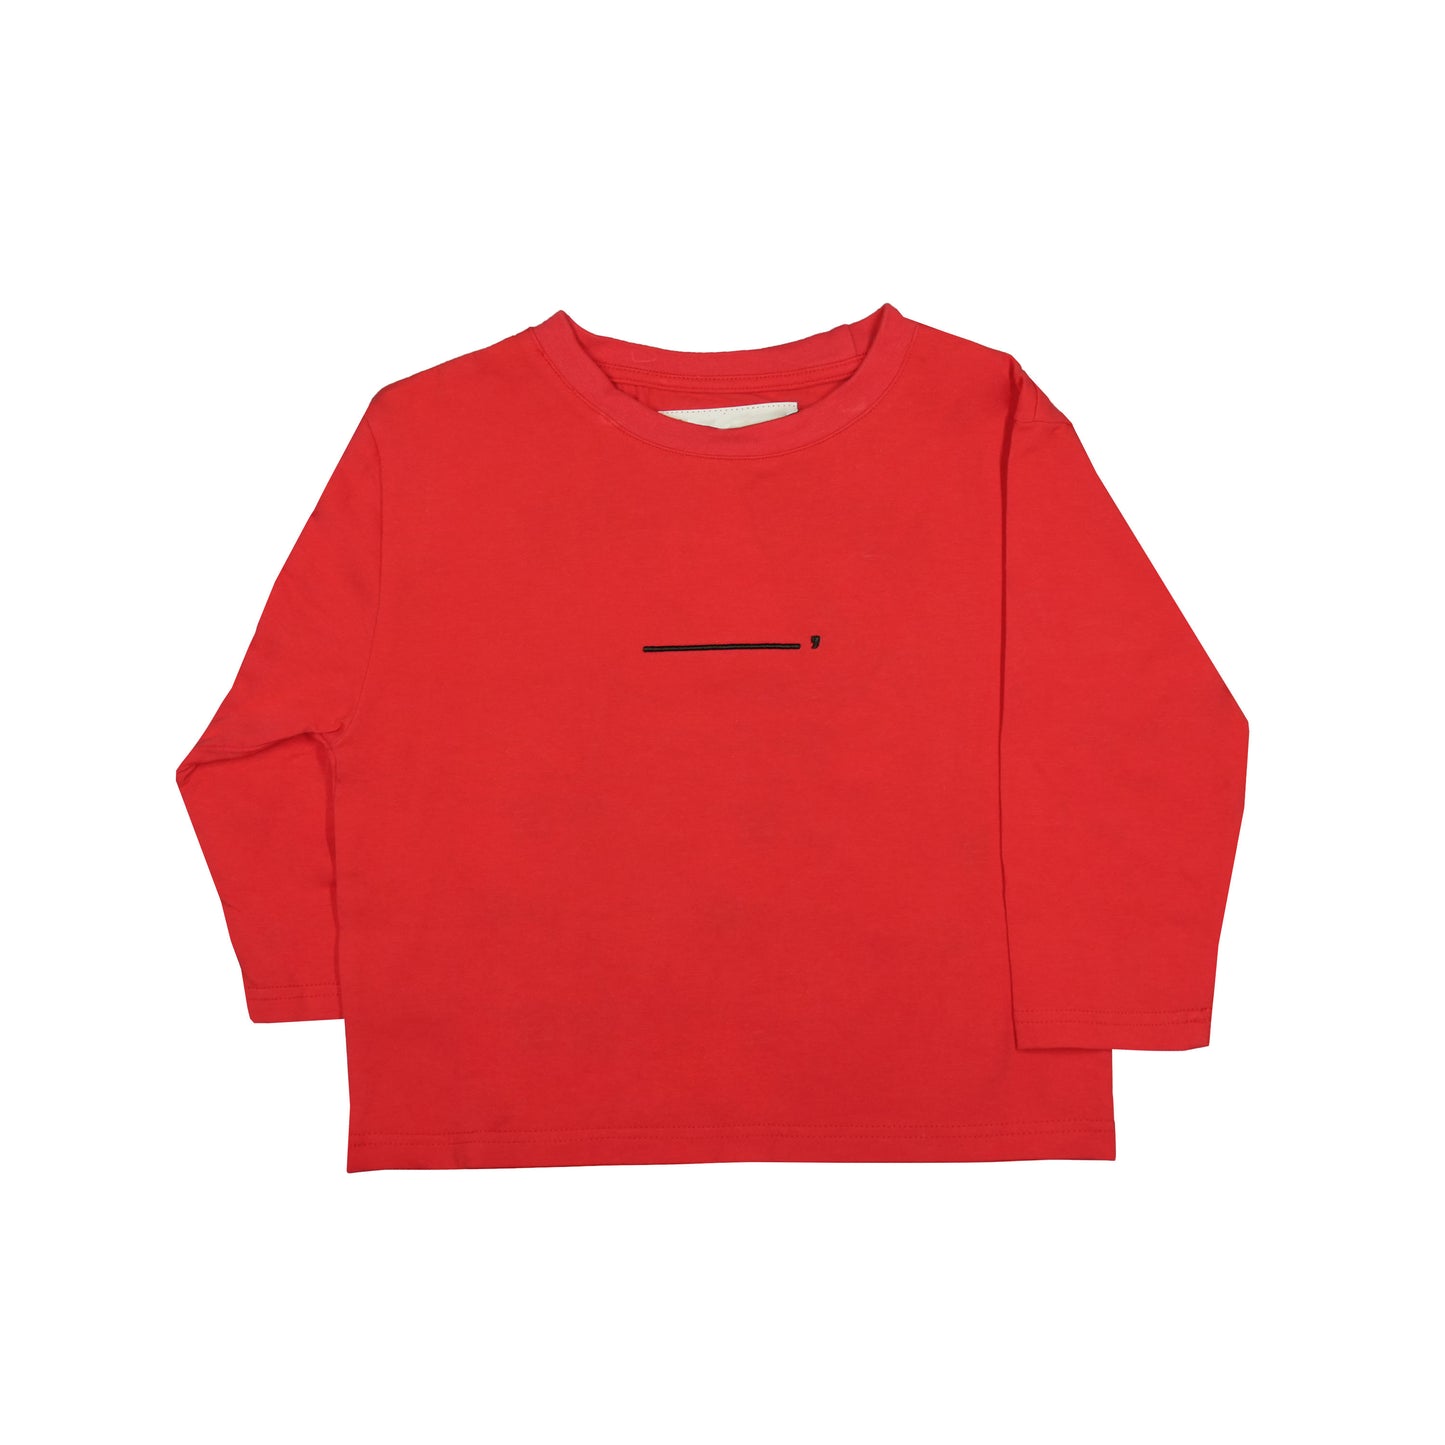 Toson, Kid - "LionDance" Patchwork Long Sleeve T-shirt - Red